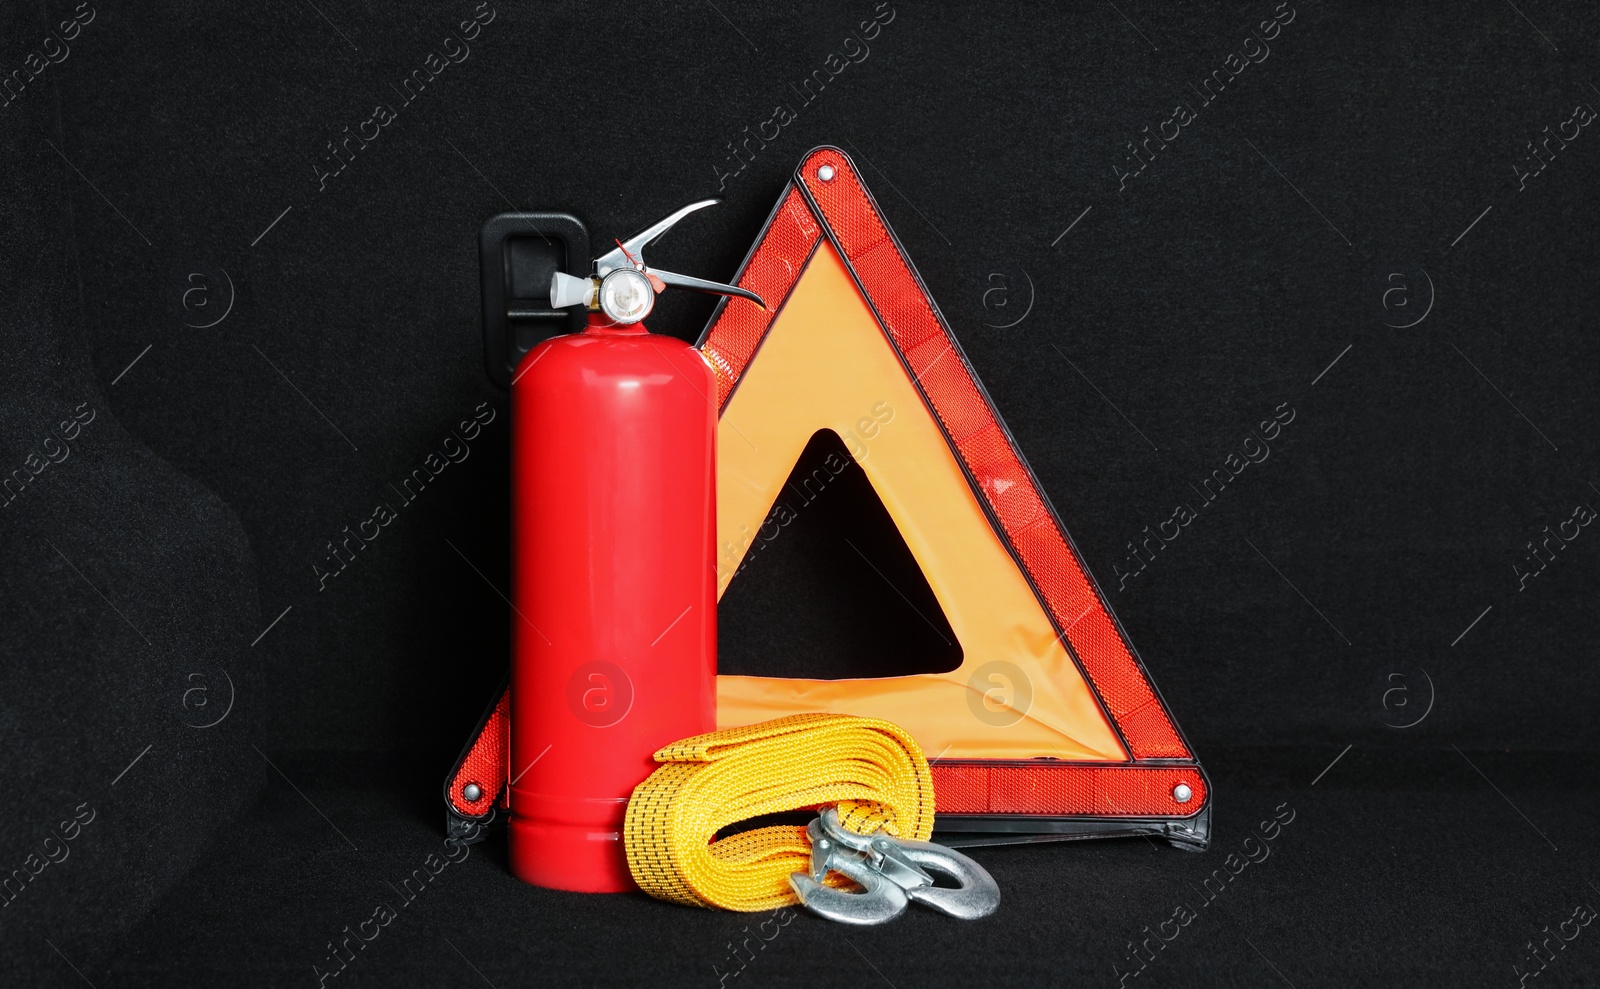 Photo of Red fire extinguisher, towing strap and foldable emergency warning triangle in trunk. Car safety